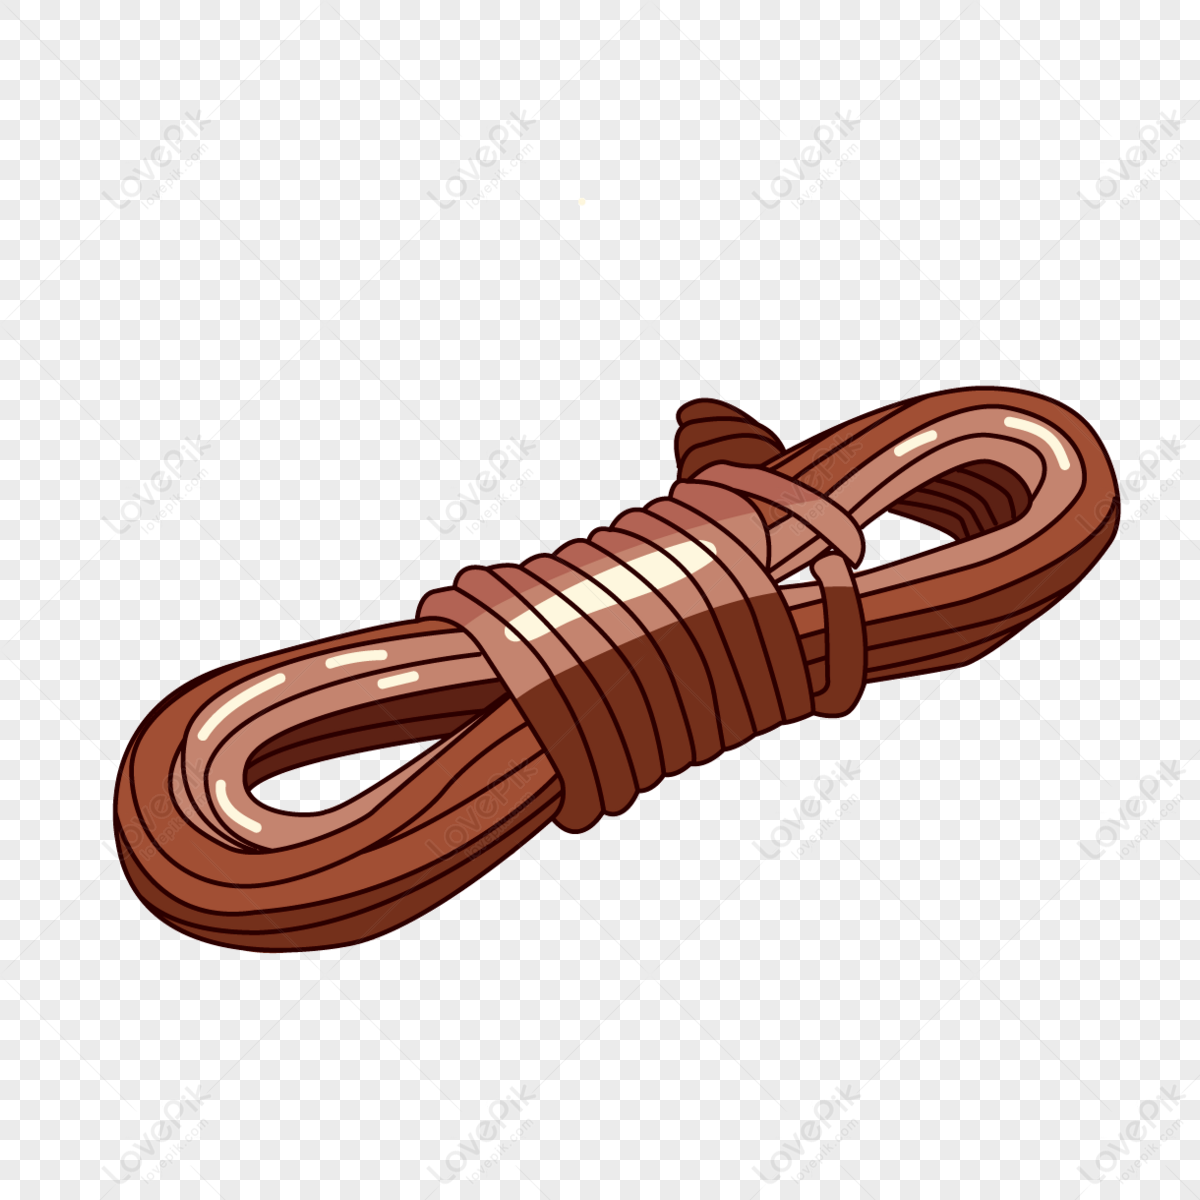 Nautical Rope PNG Images With Transparent Background